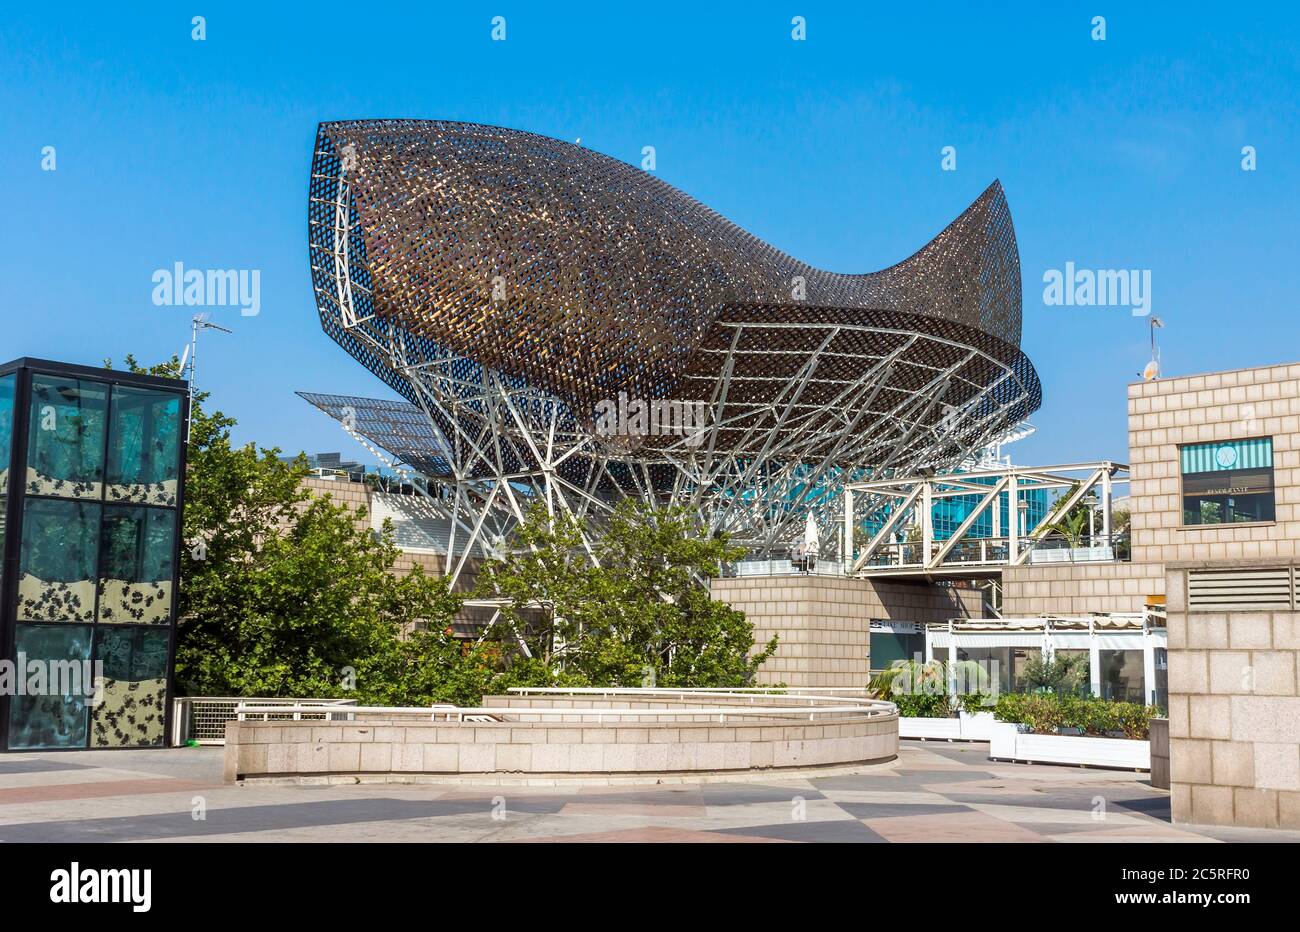 BARCELONA, SPAIN - JULY 12, 2015: Frank Gehry's modern El Peix d'Or sculpture is located in Barcelona's Vila Olimpica, Olympic Village for the 1992 Ol Stock Photo